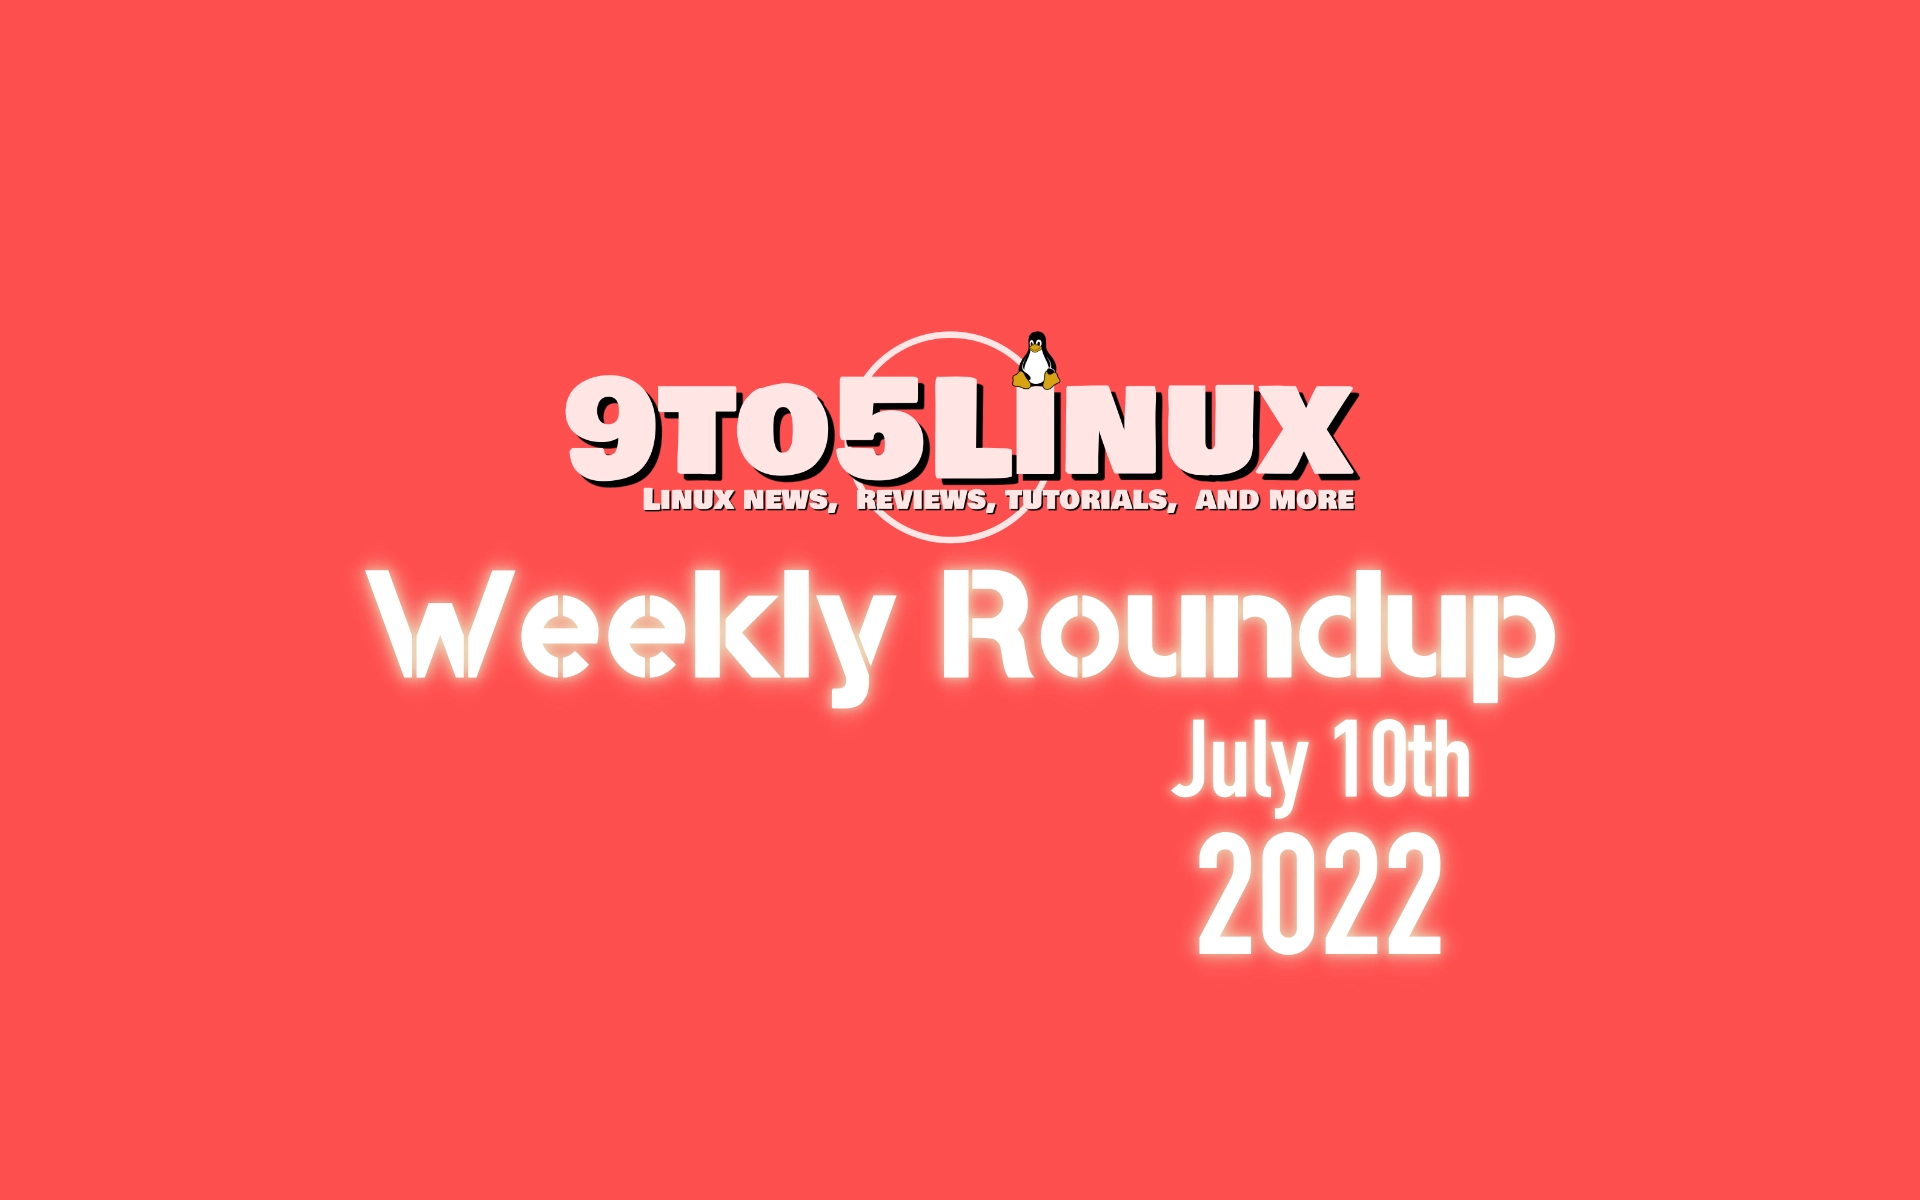 9to5Linux Weekly Roundup: July 10th, 2022